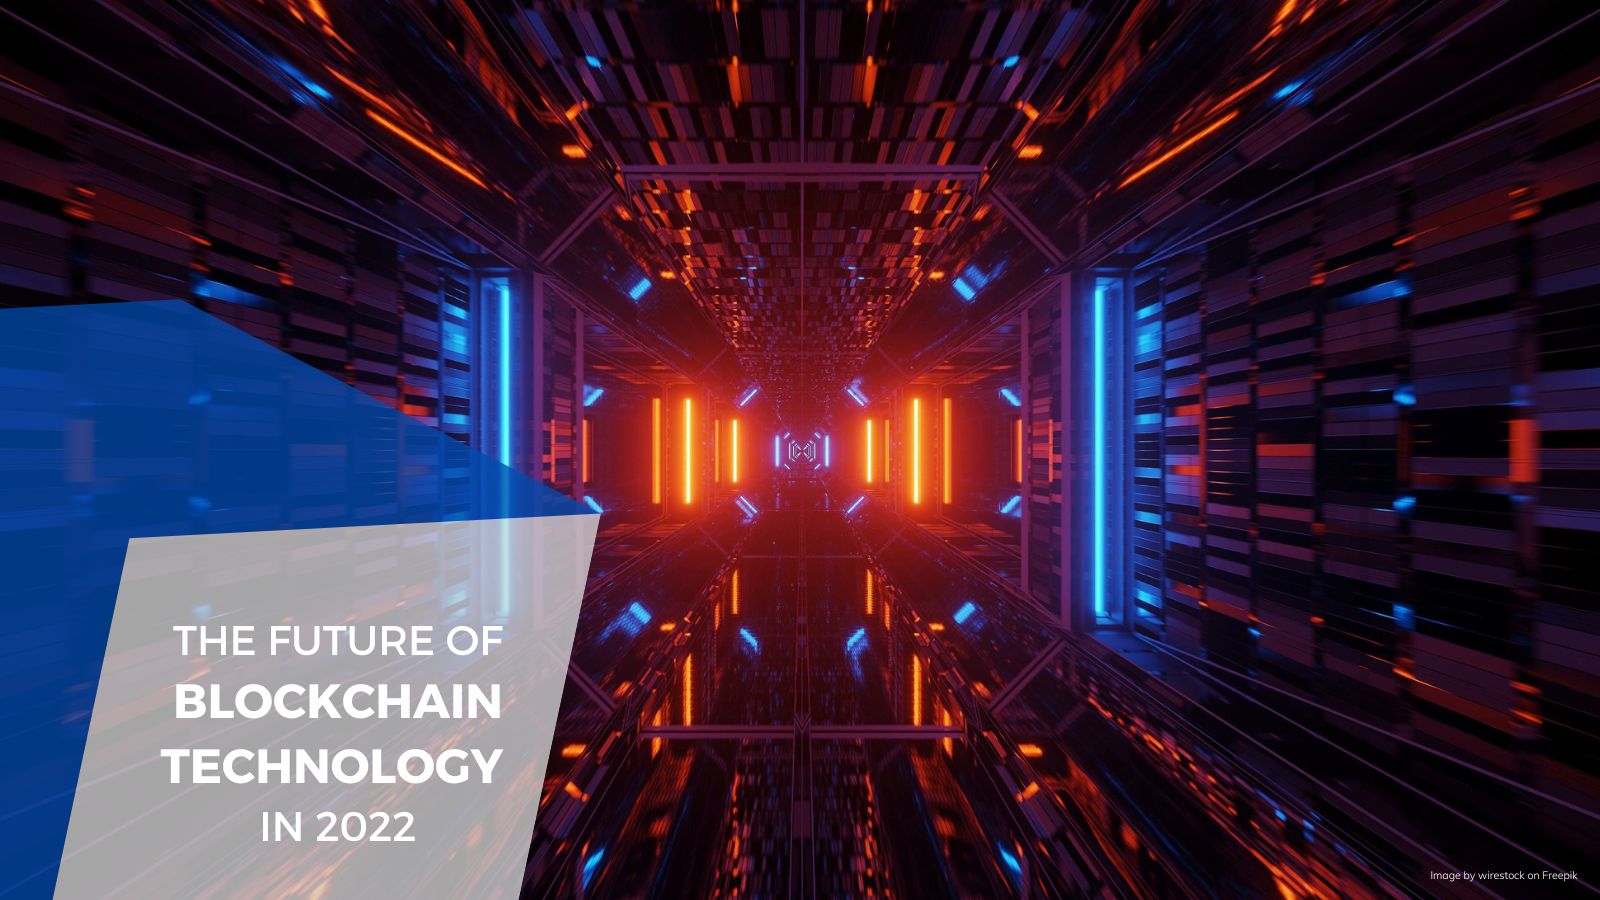 The Future of Blockchain Technology in 2022